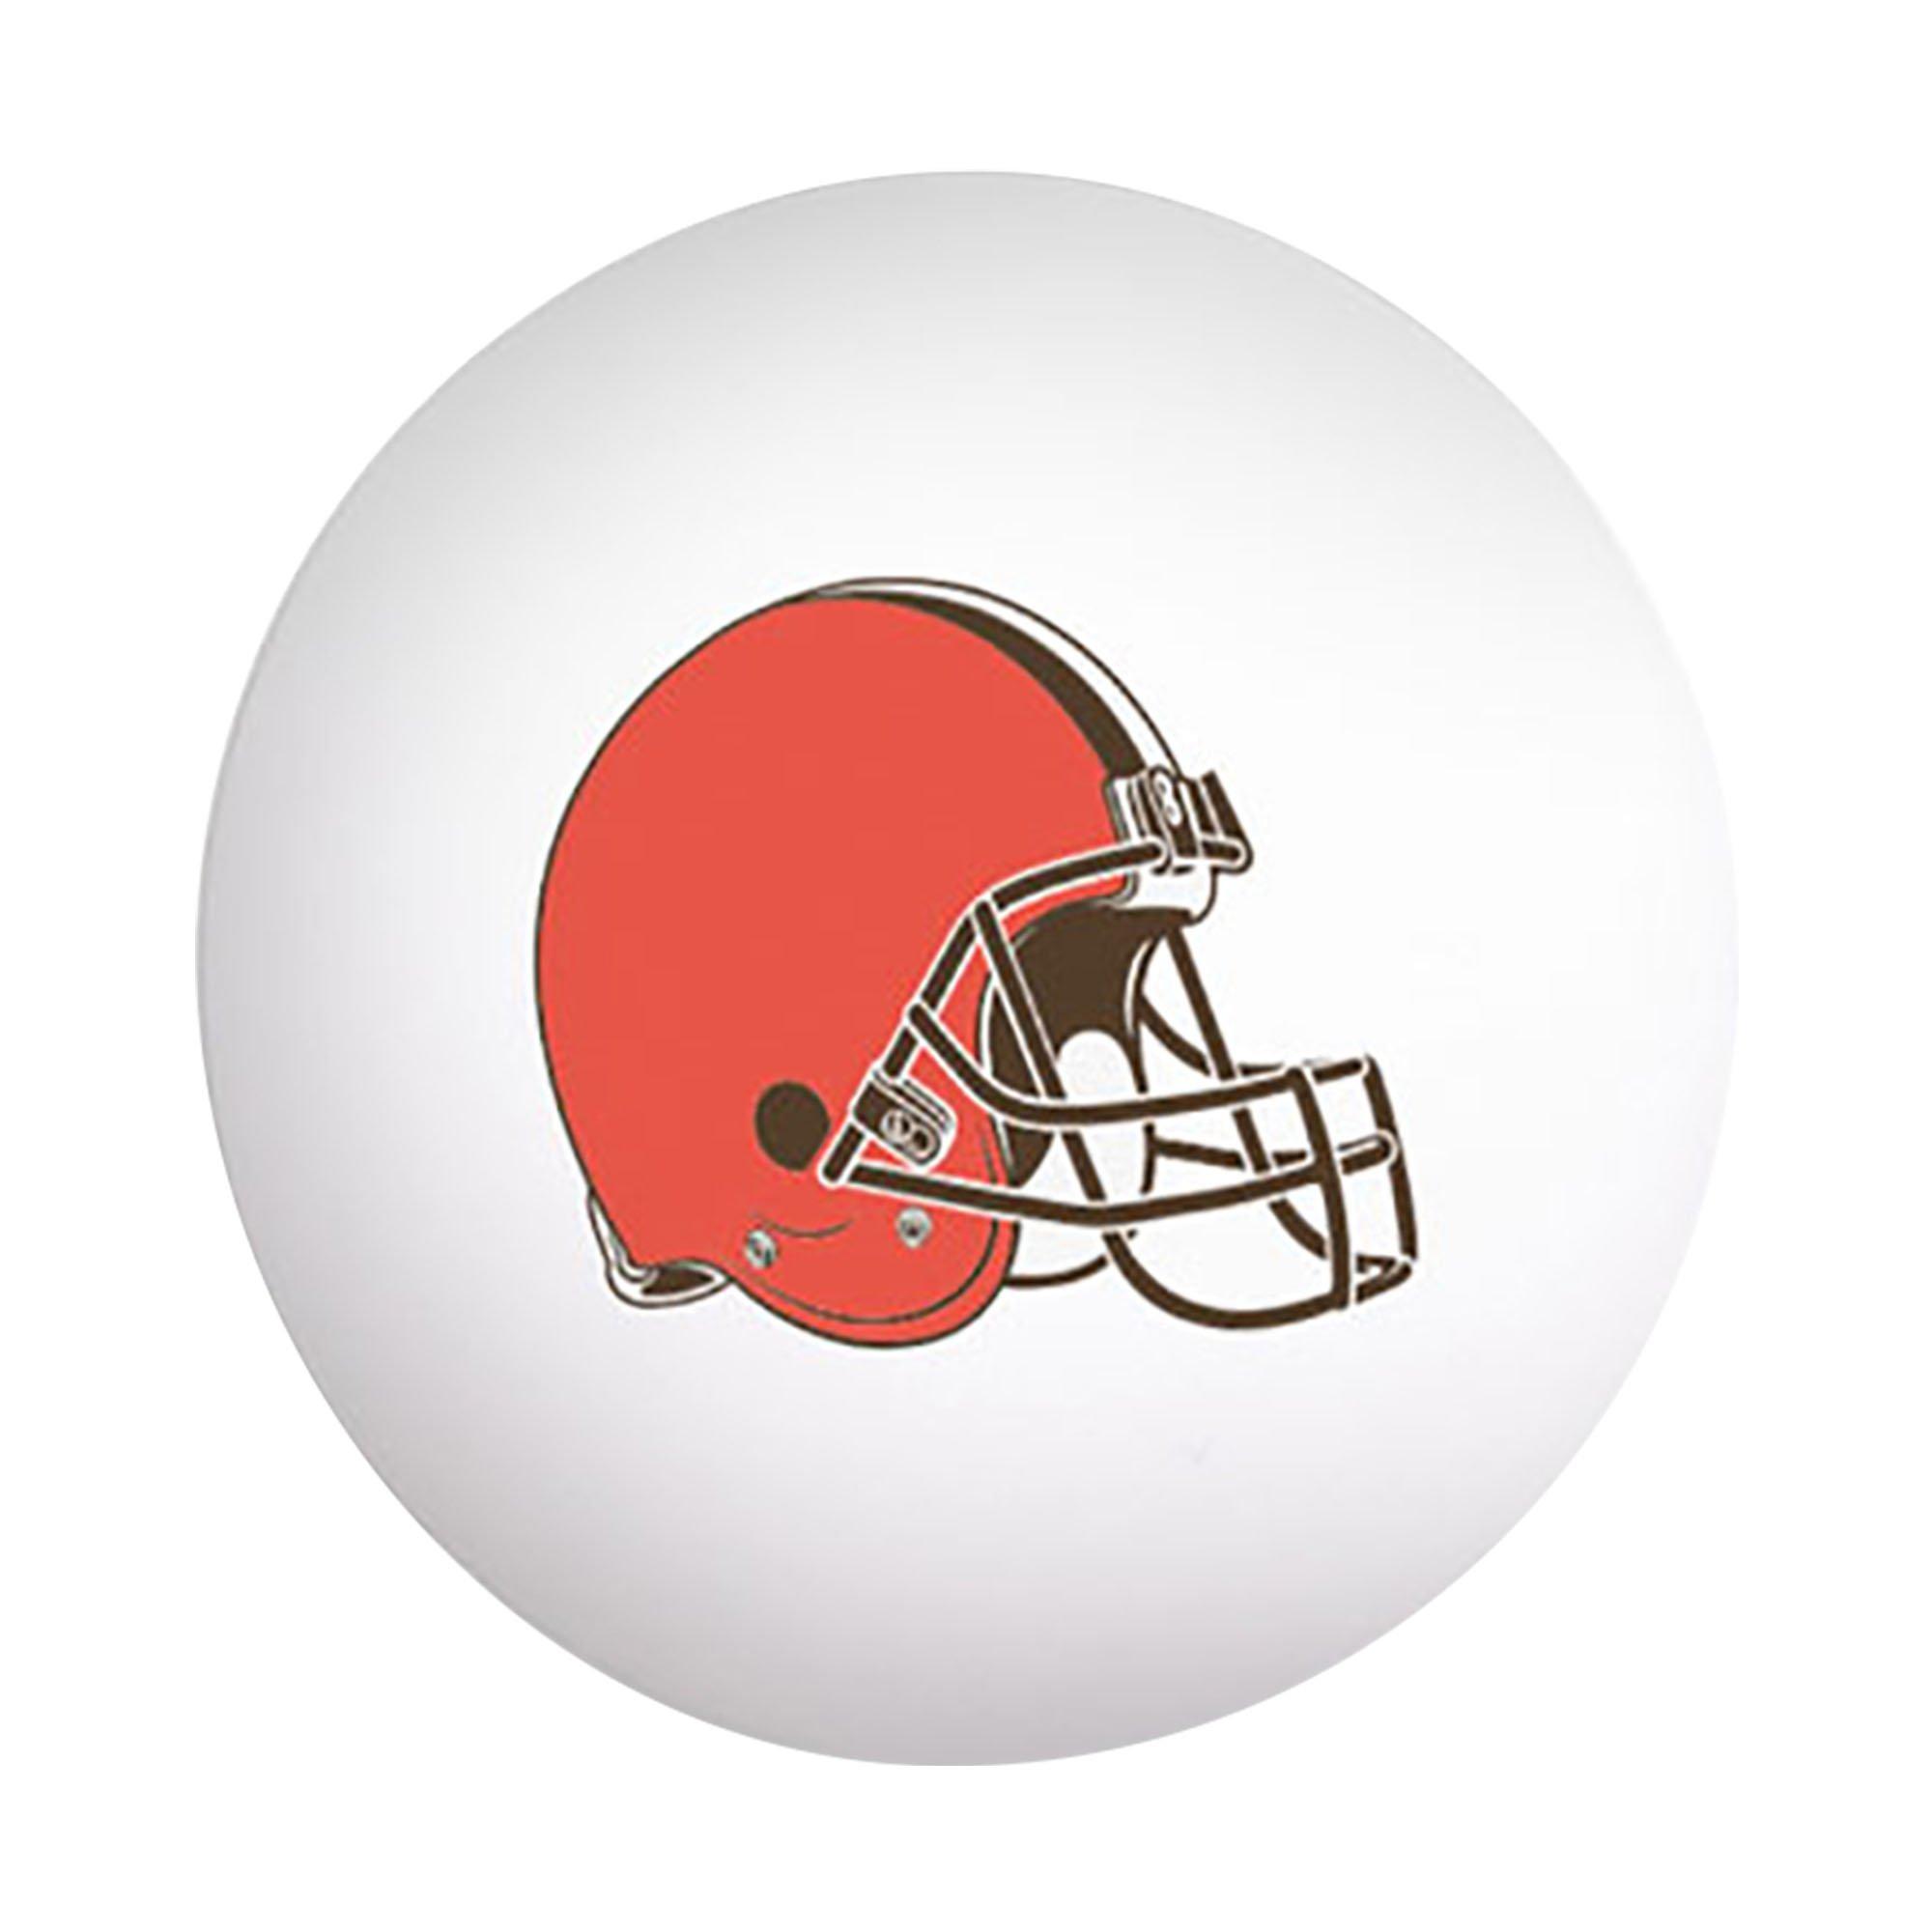 Cleveland Browns Table Tennis Balls, 6ct